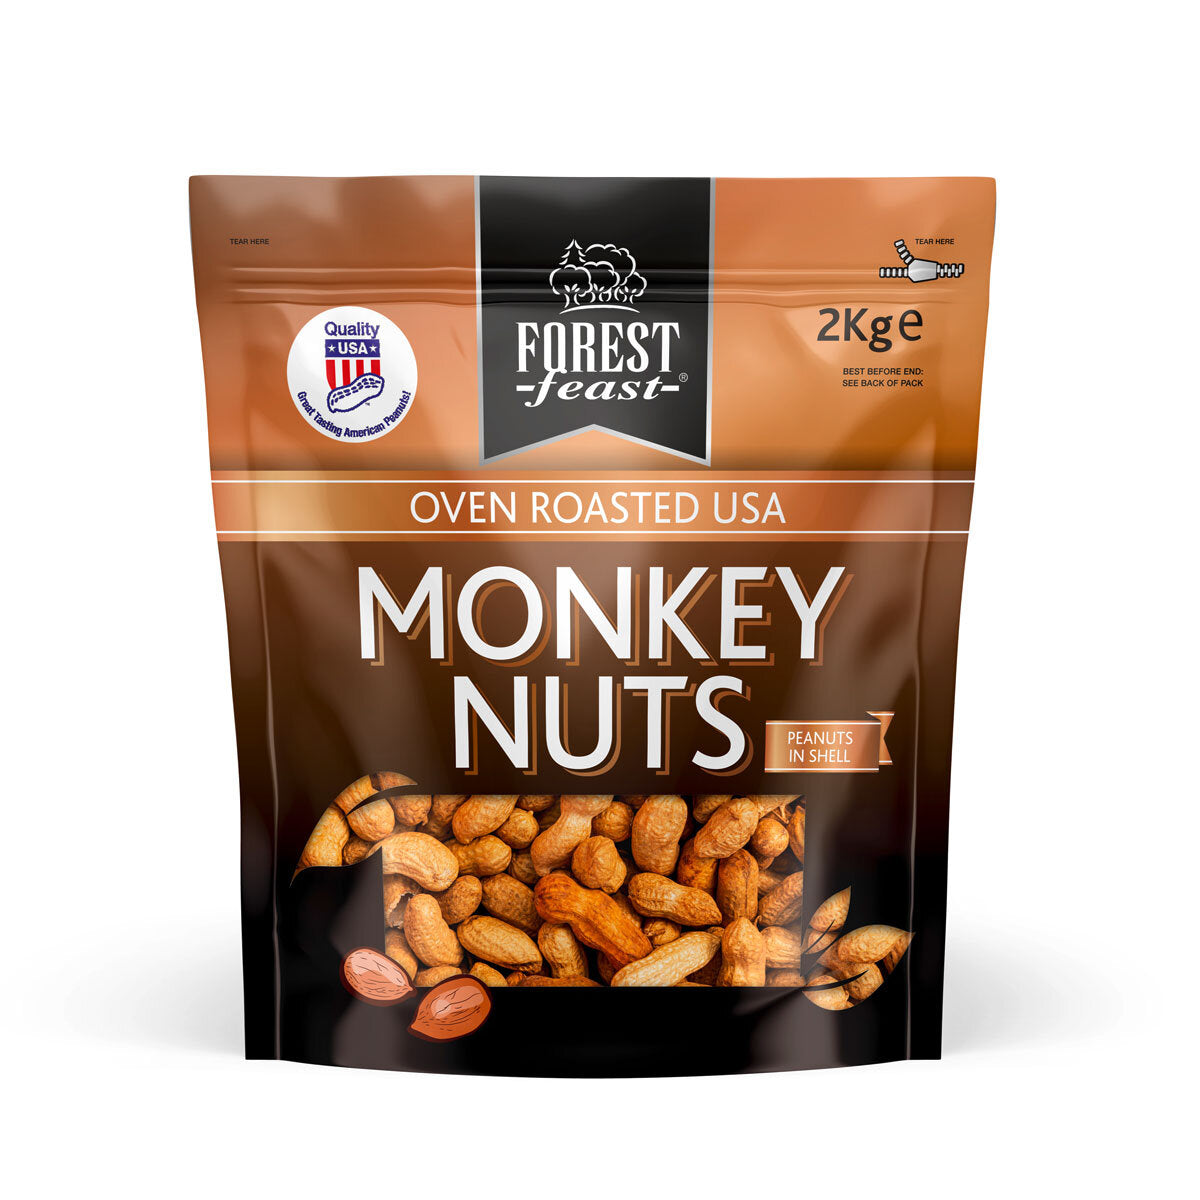 Forest Feast Oven Roasted Monkey Nuts - 2kg